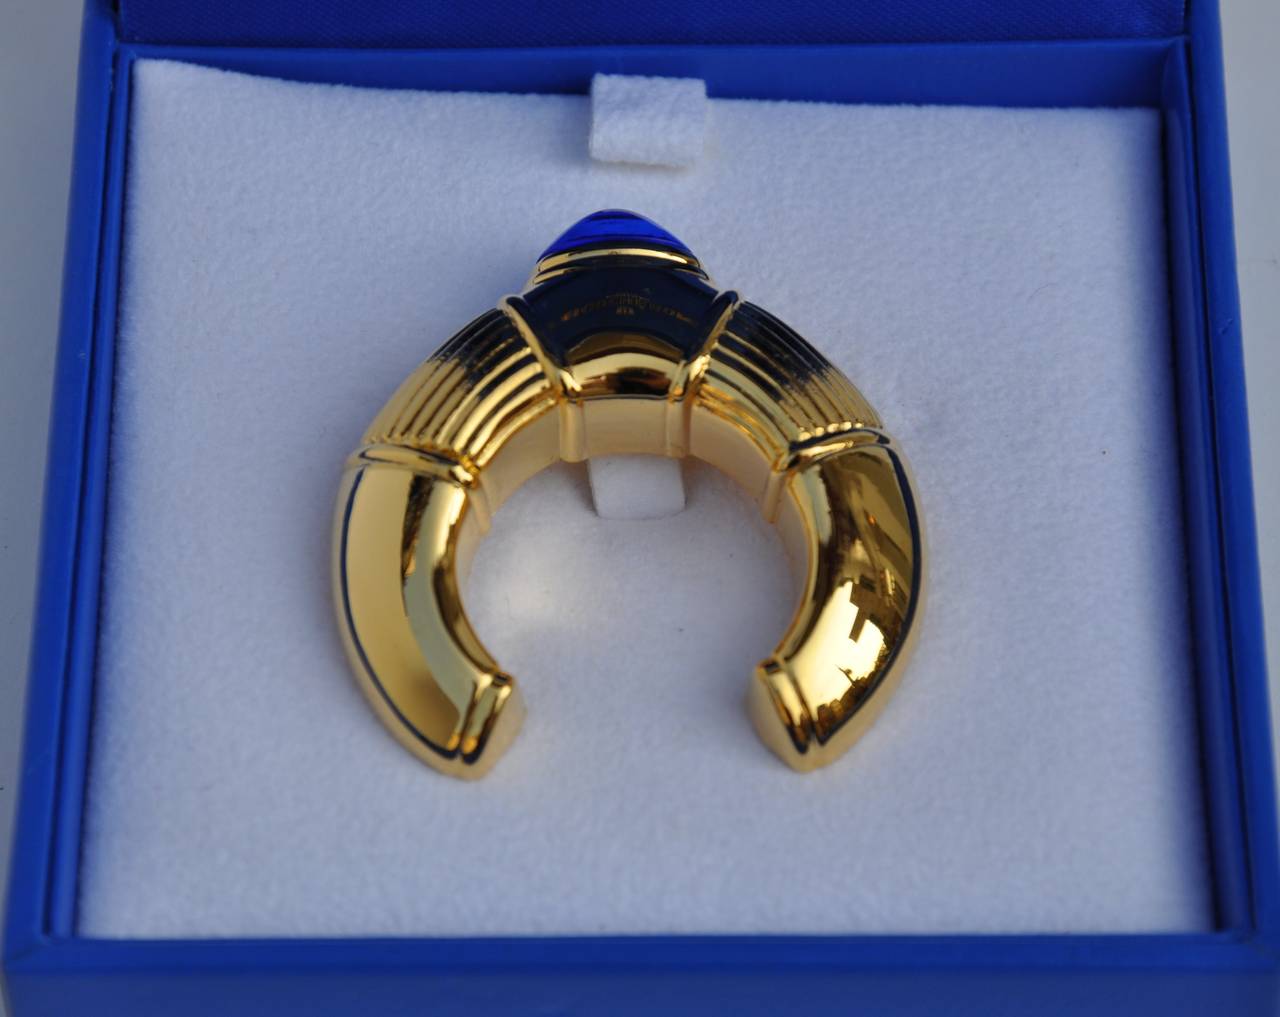 Boucheron signature gilded gold vermeil finish hardware with "Lapis" hue accent brooch measures 1 7/8" in height, 1 5/8" in width and 3/8" in depth. Brooch is signed on the backside.